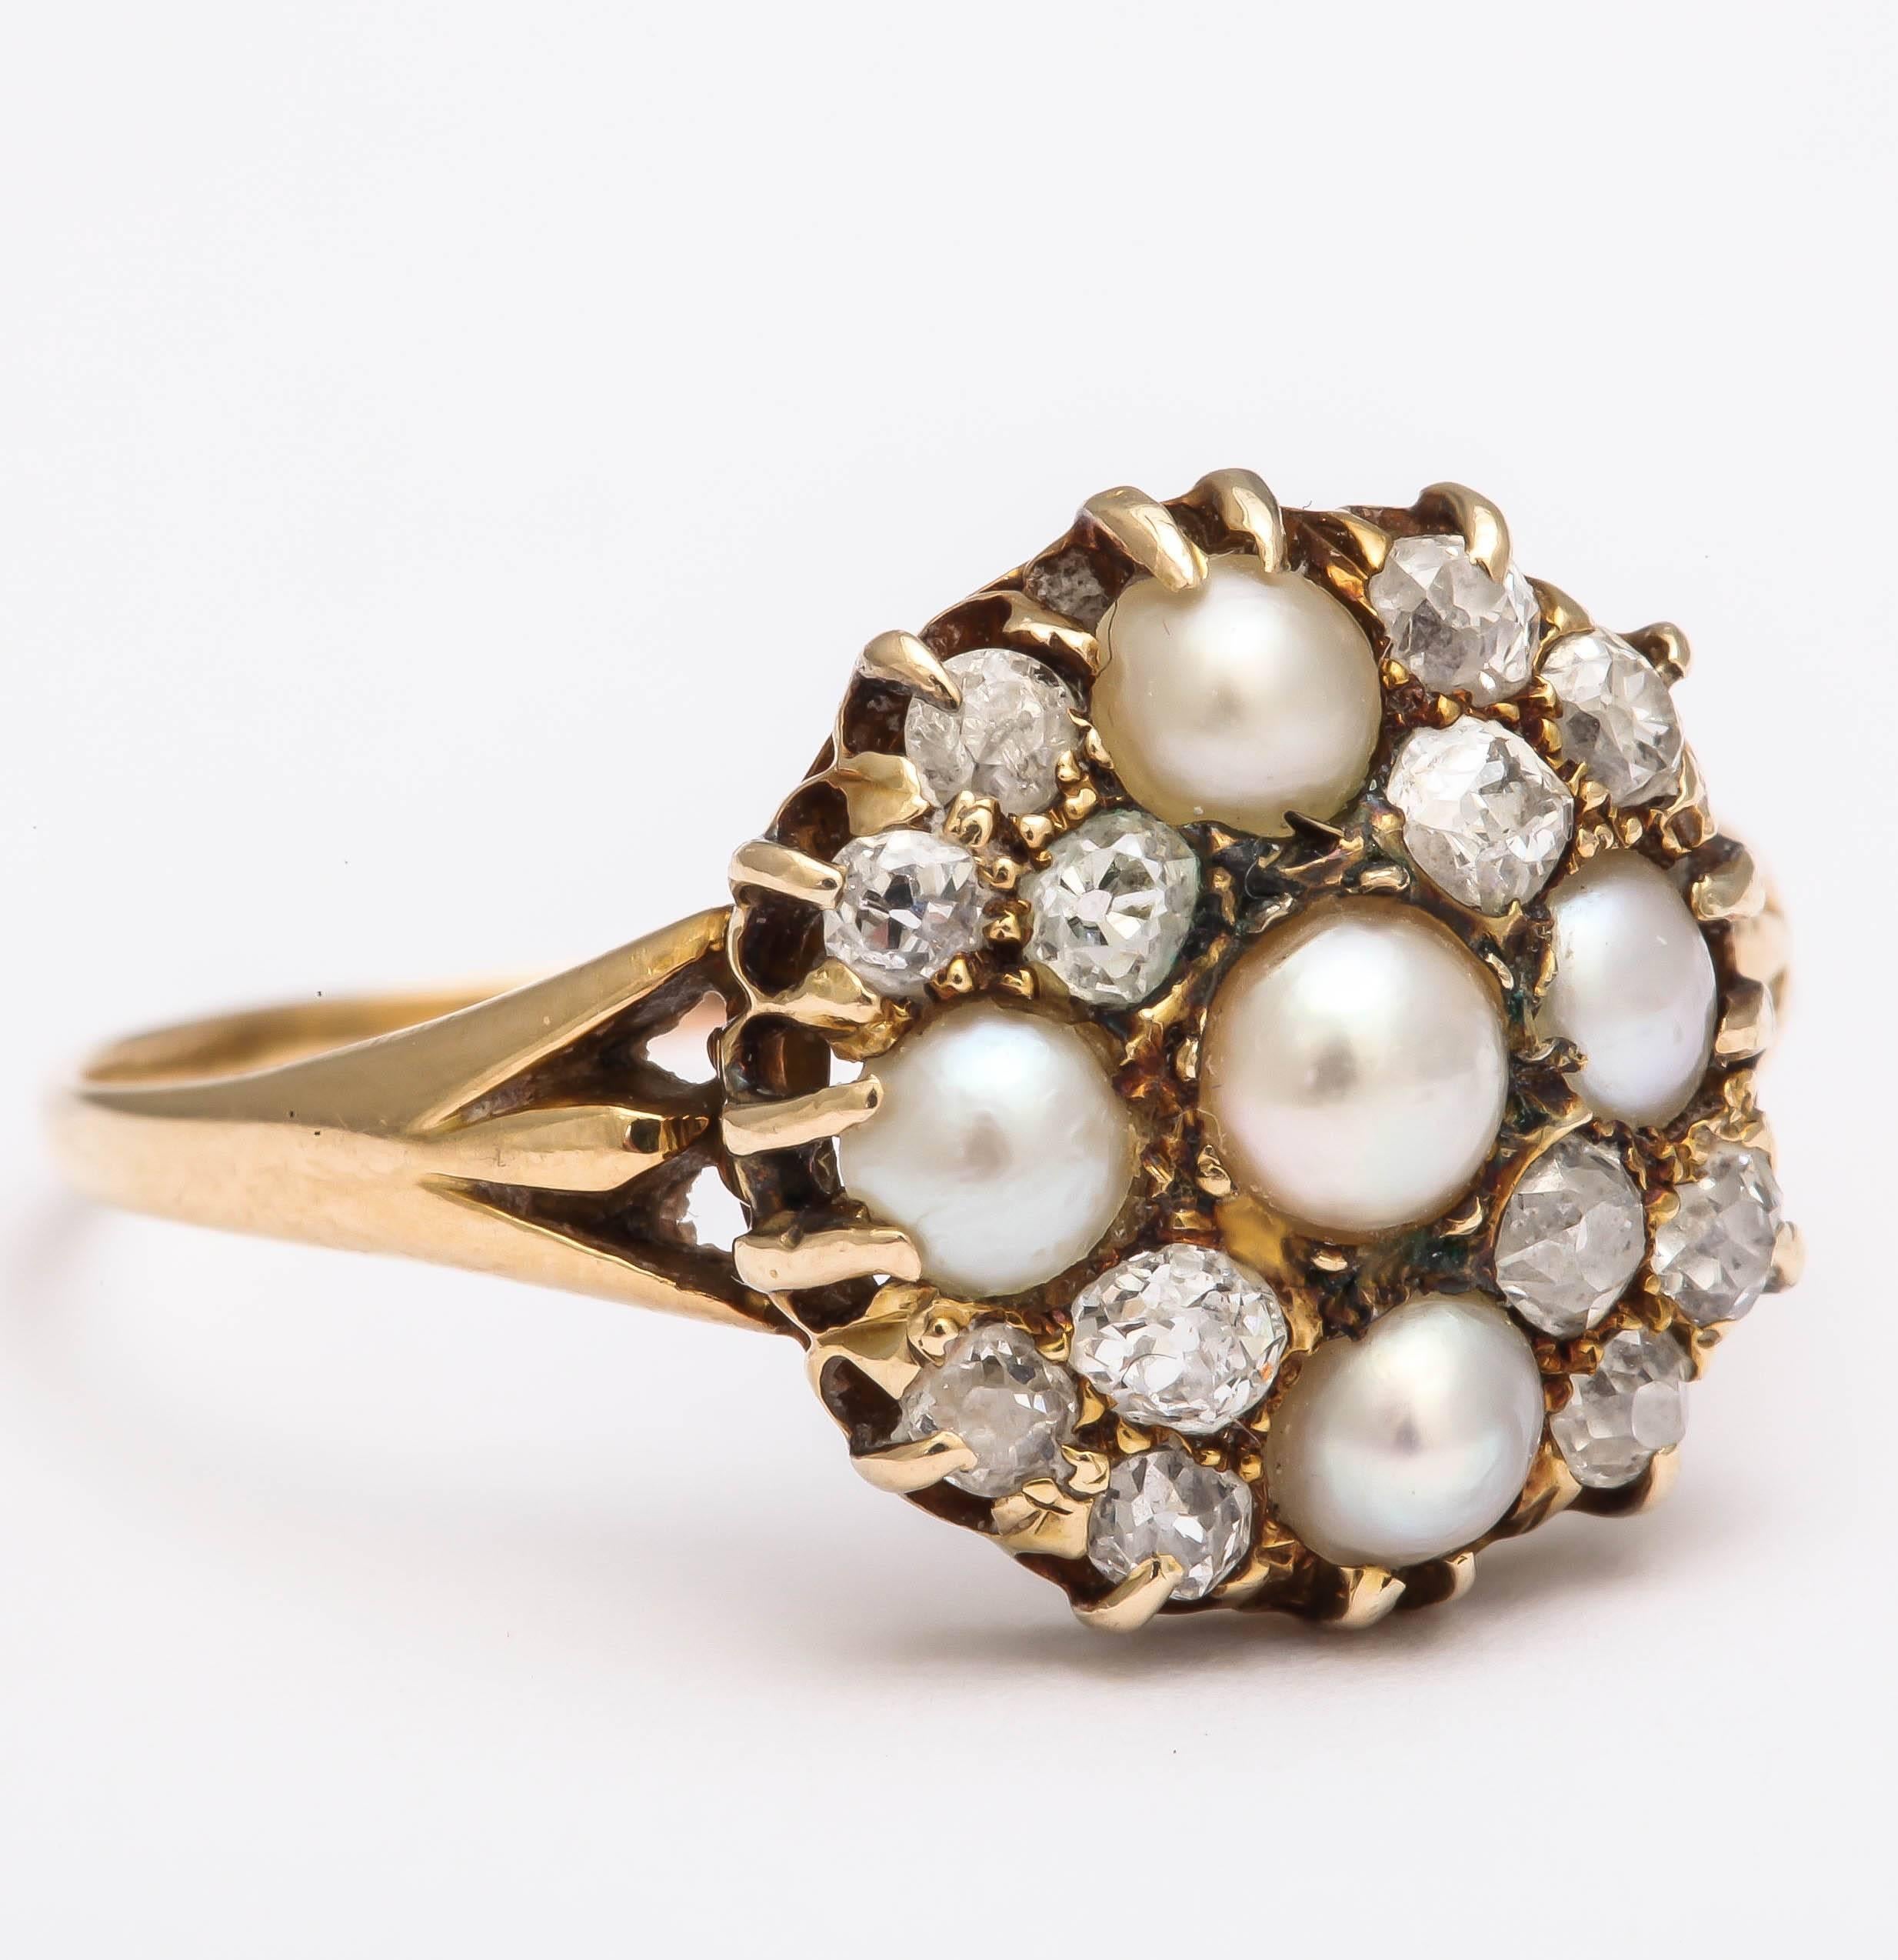 This beautifully designed ring is set with 5 natural pearls in 18K yellow gold. 12 old mine cut diamonds weighing approximately .35cts are set between the pearls. Elegant split shoulder design on either side of the head. Can be sized. 